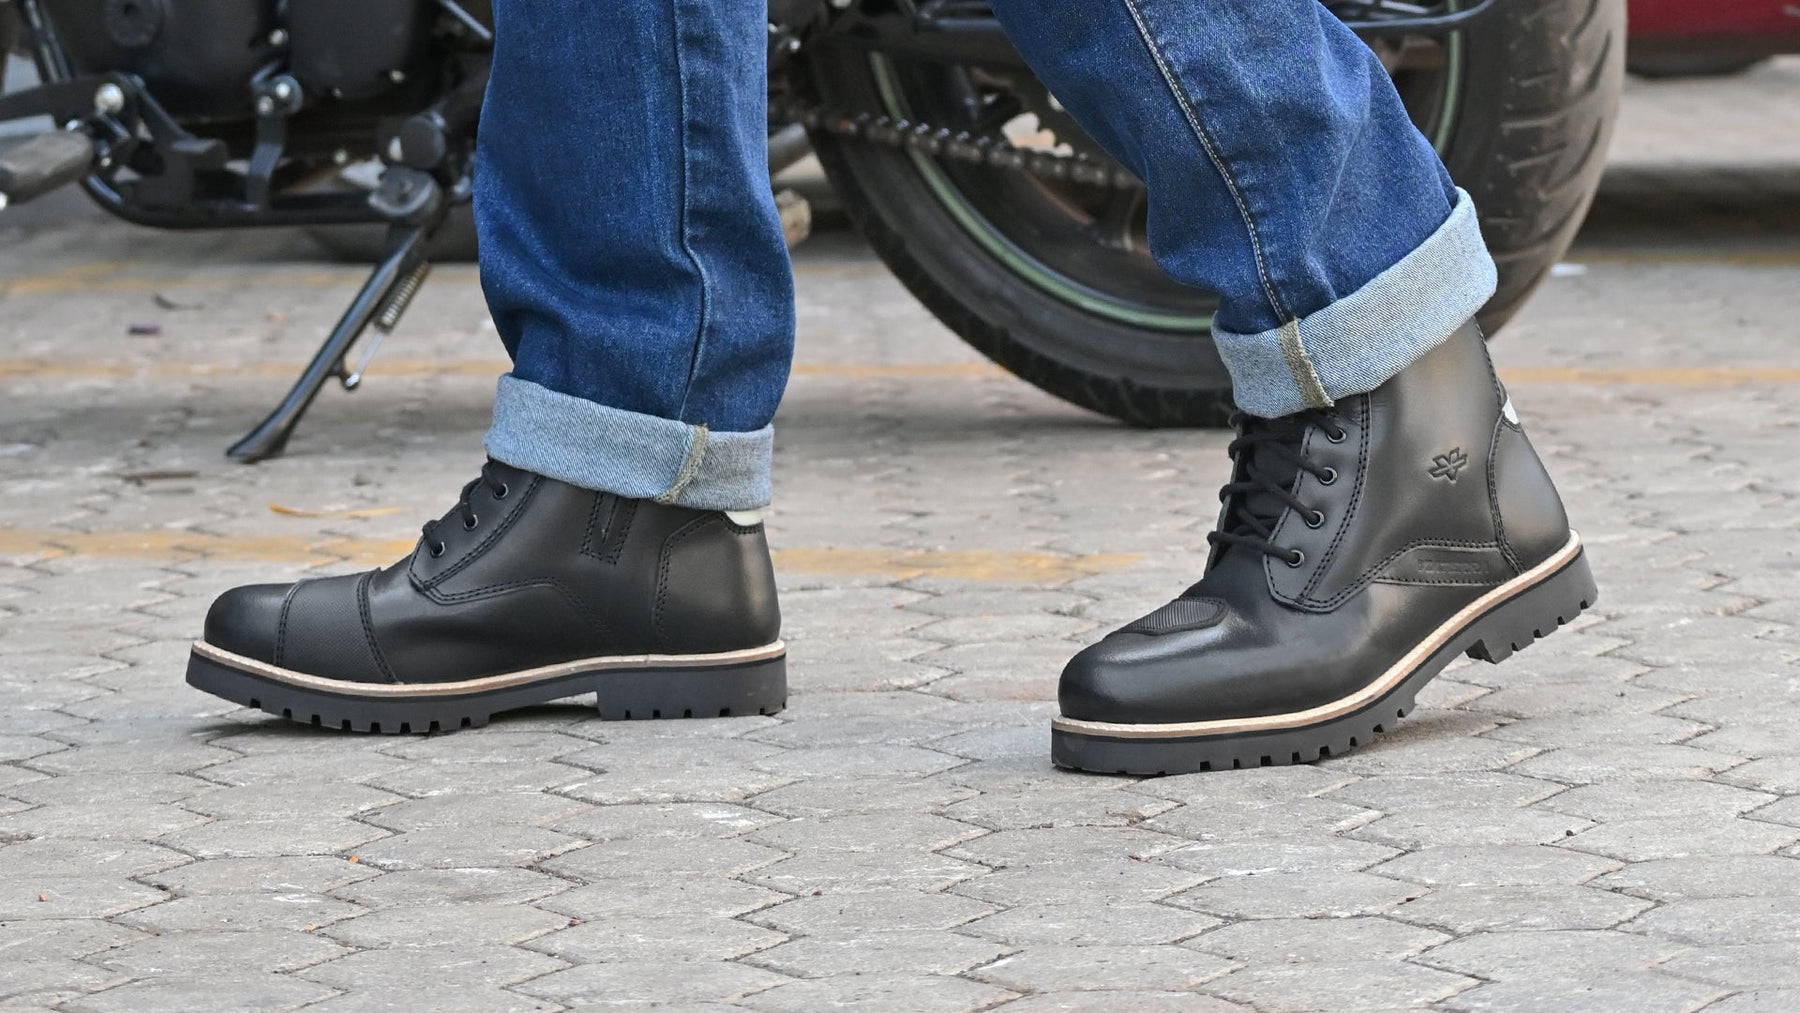 Motorcycle Riding Boots